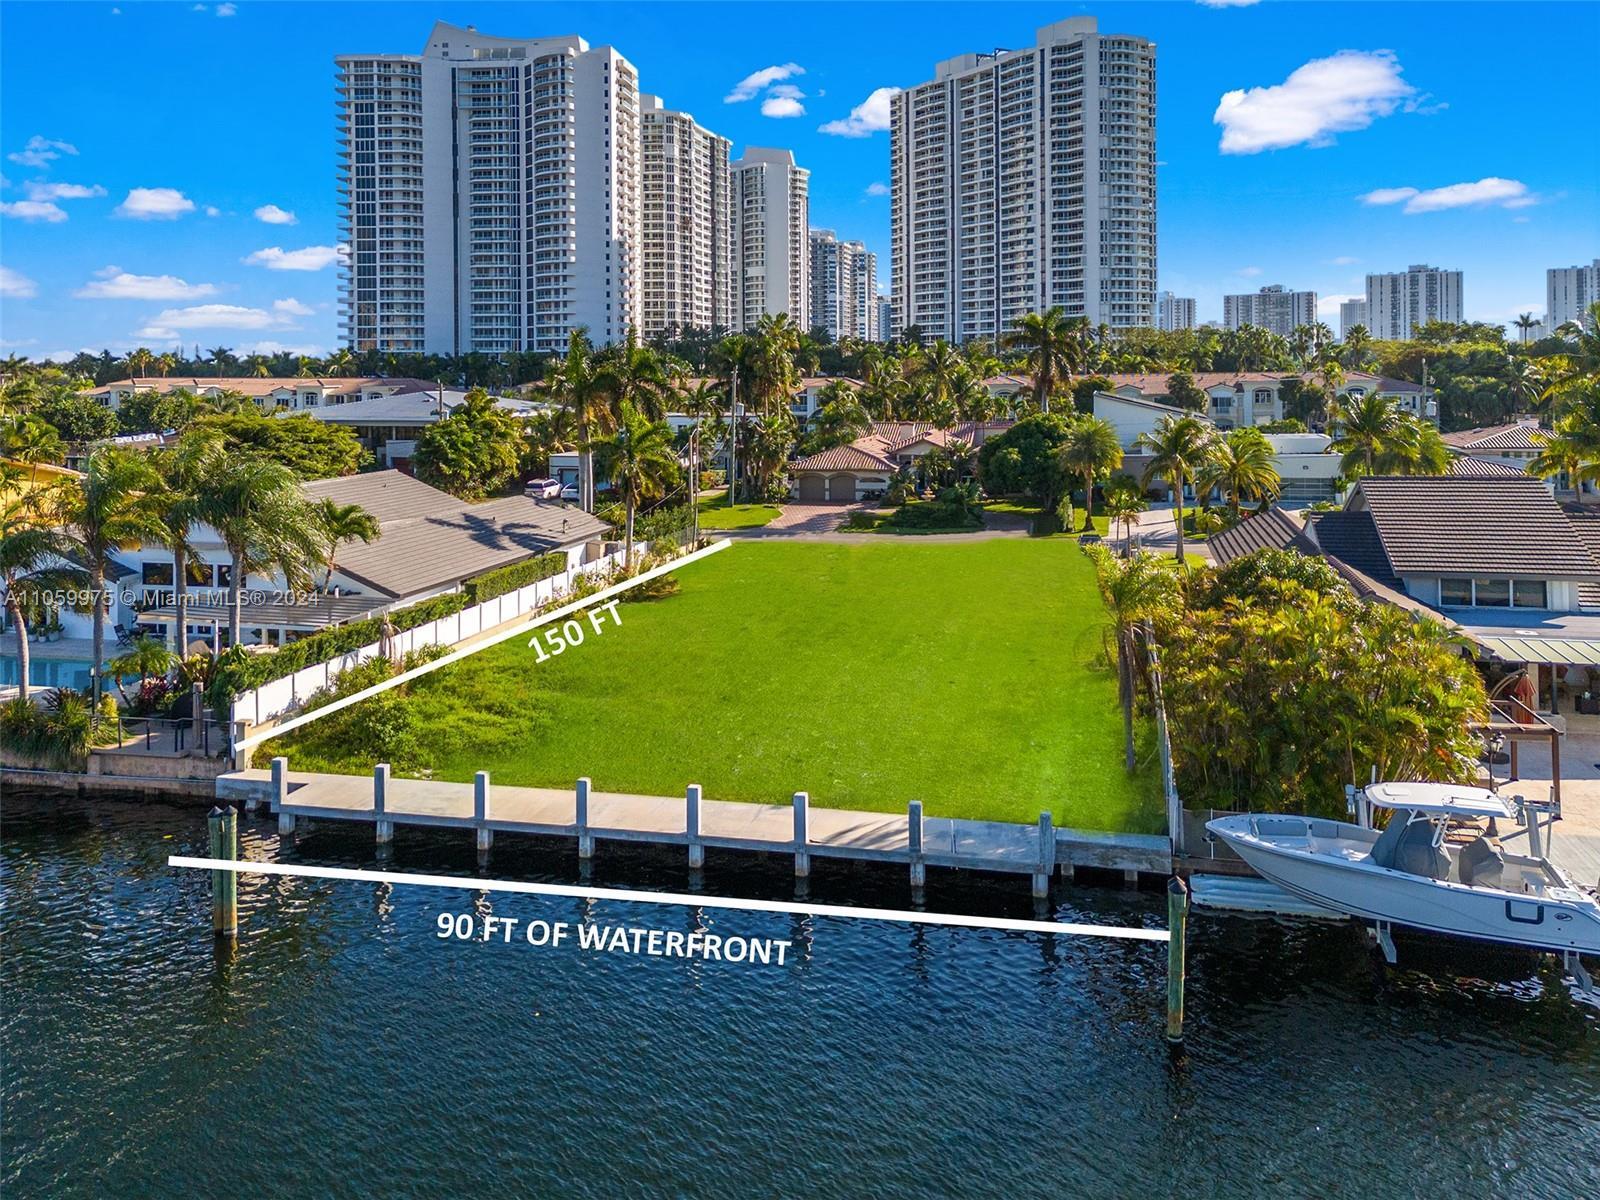 Photo of 306 Holiday Dr in Hallandale Beach, FL